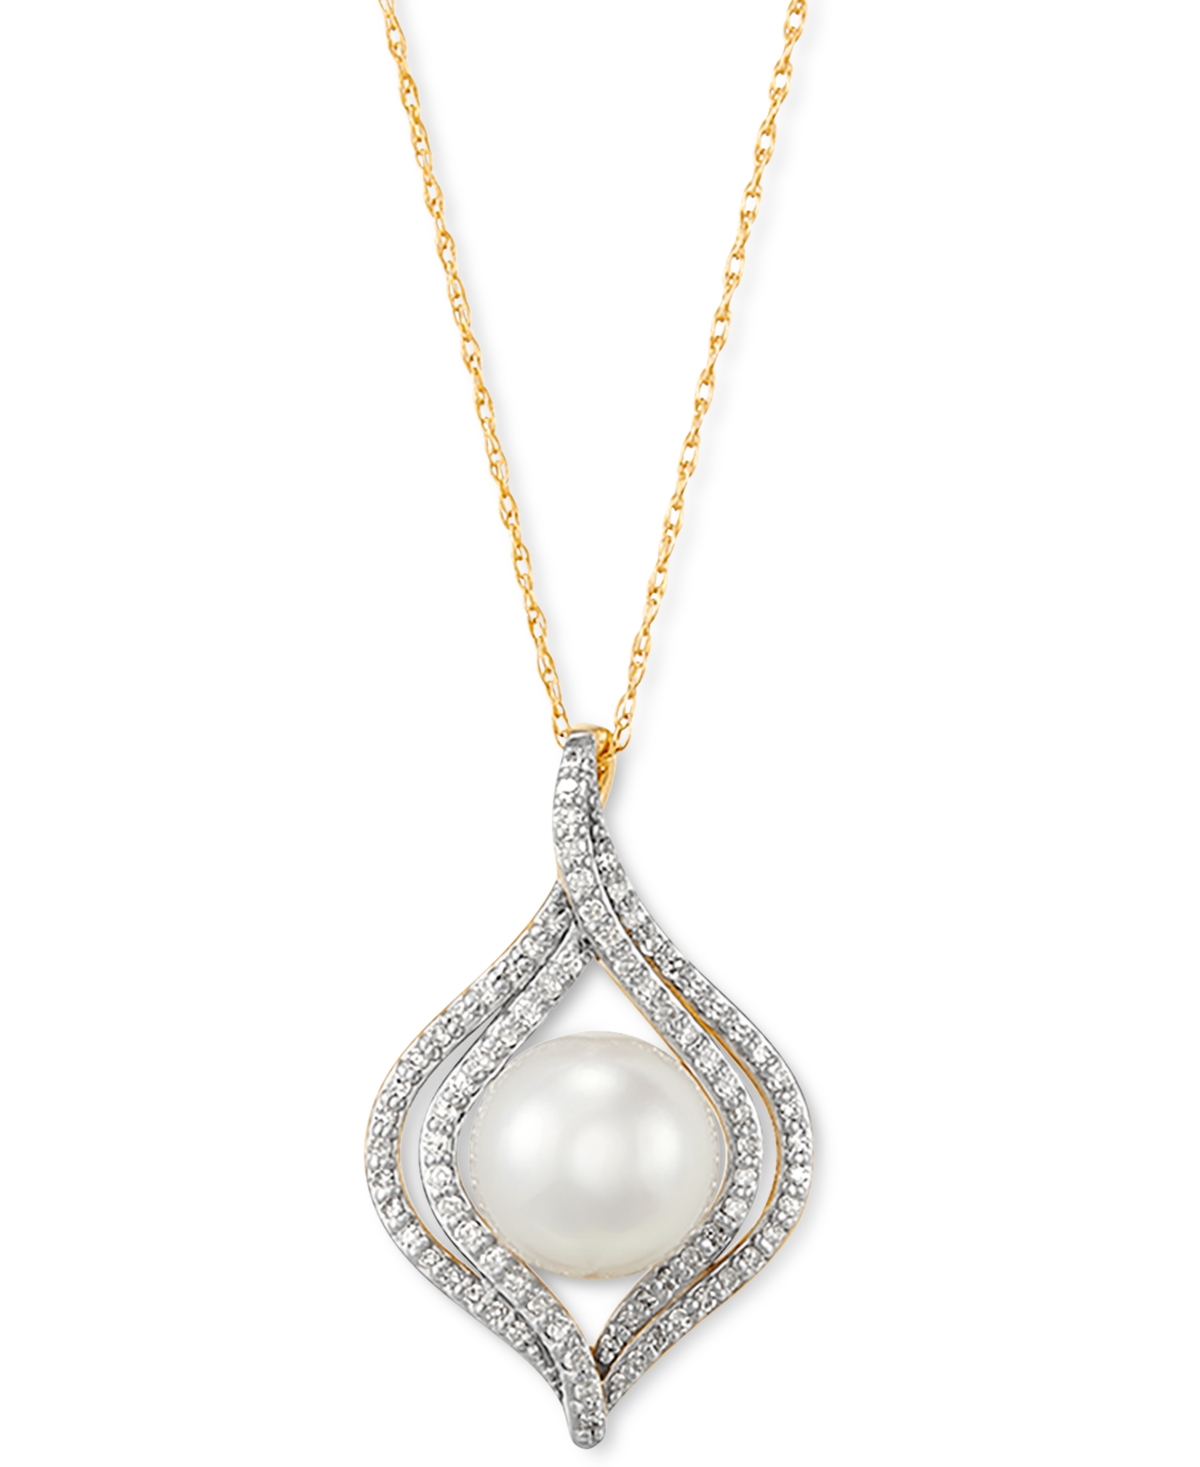 HONORA CULTURED FRESHWATER PEARL (8MM) & DIAMOND (1/4 CT. T.W.) 18" PENDANT NECKLACE IN 14K YELLOW, WHITE O